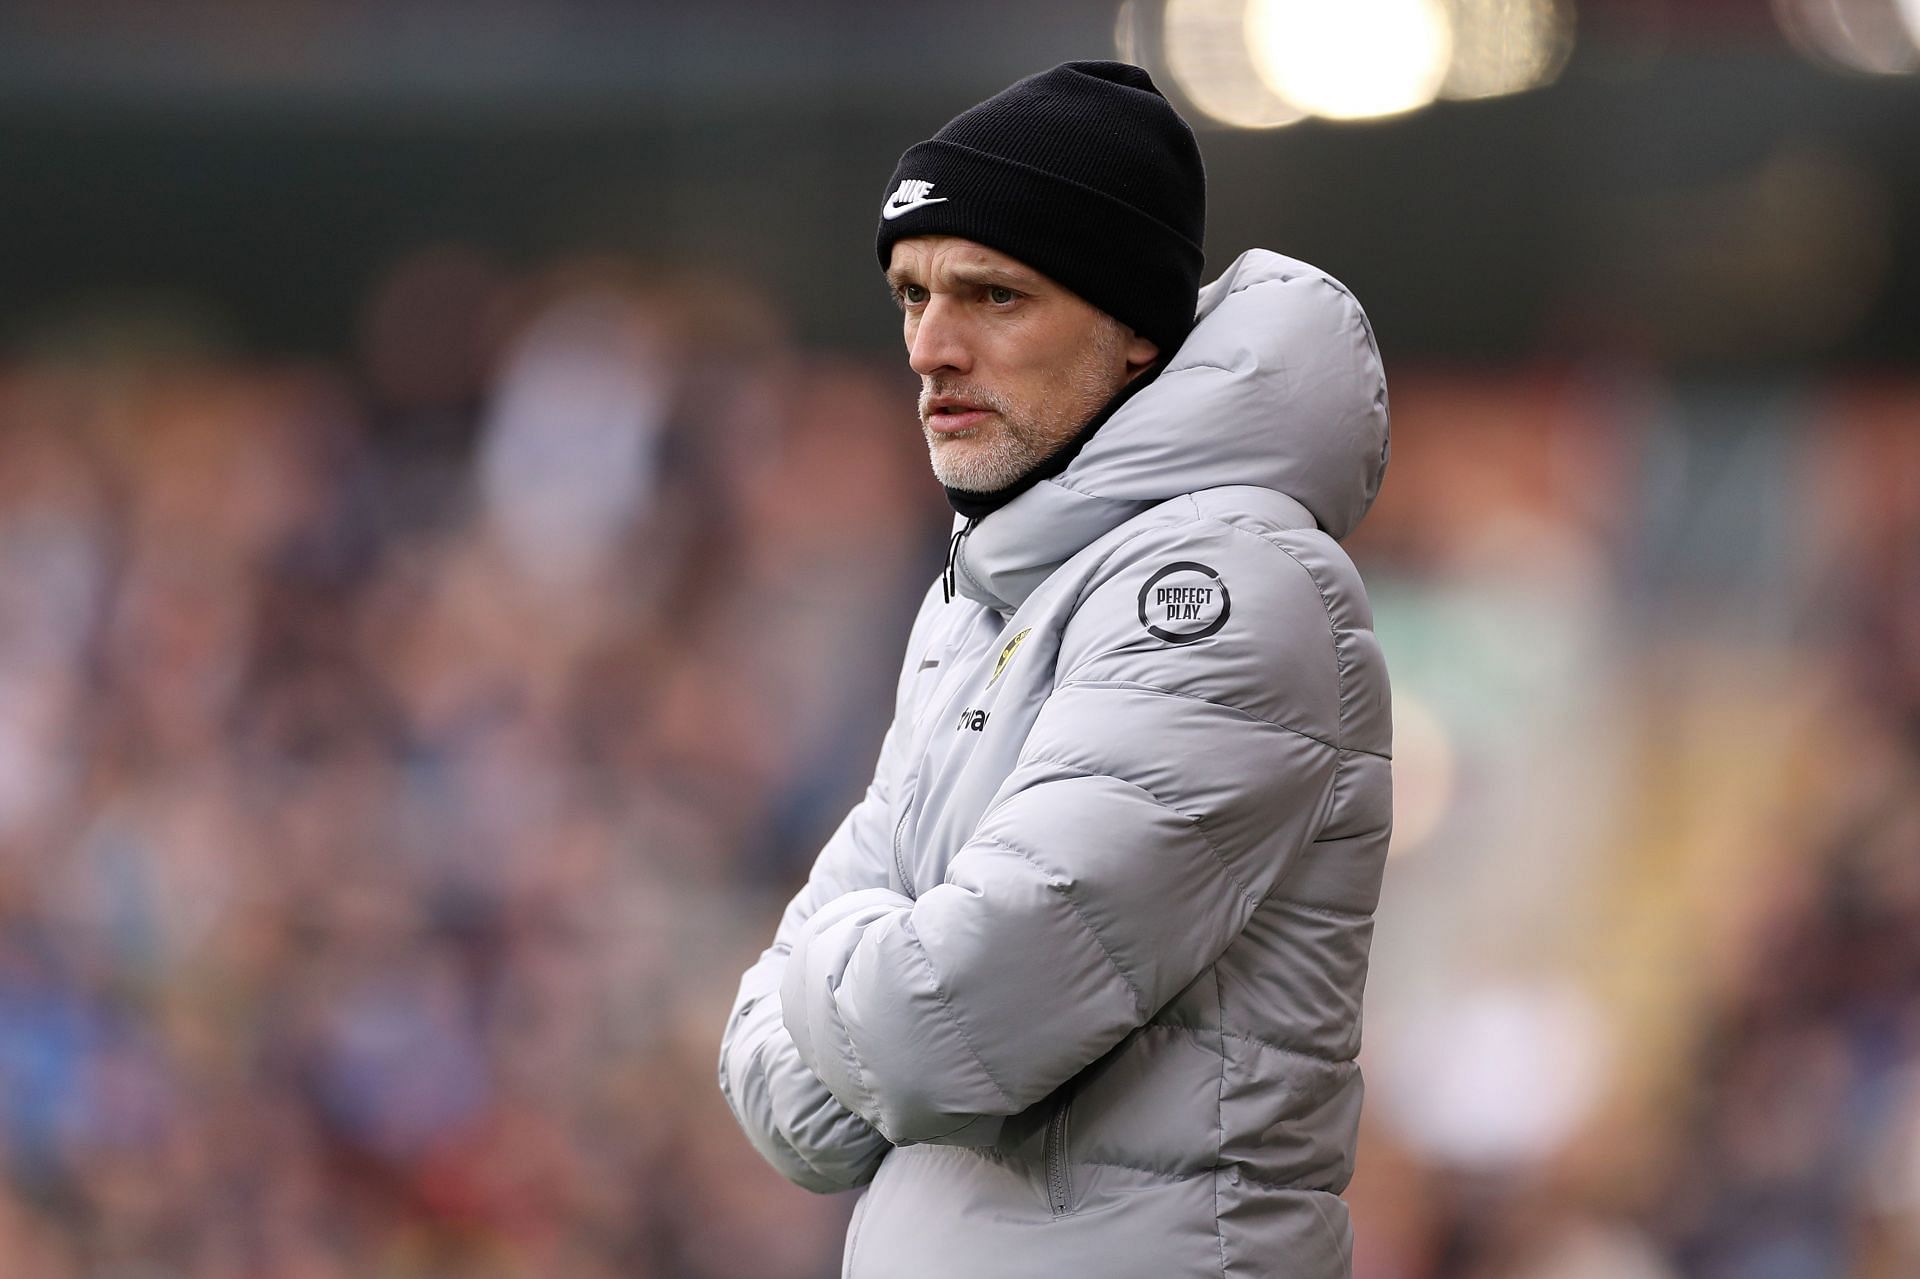 Chelsea manager Thomas Tuchel will target three points against Brentford.